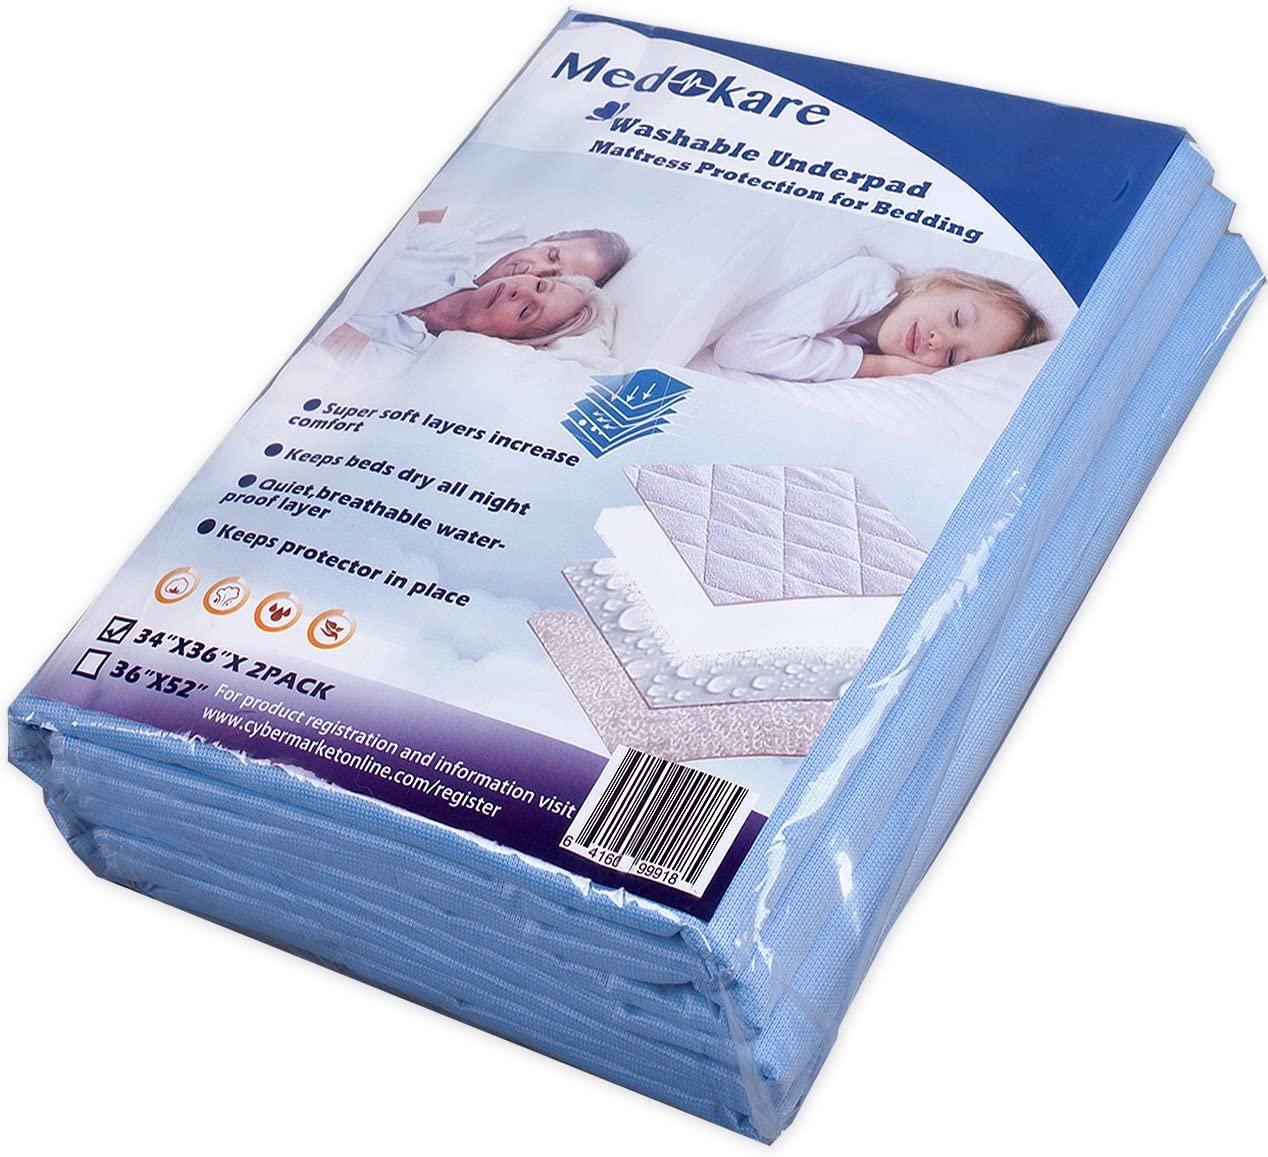 Medokare Bed Pads for Seniors, Adults and Kids – 3 Pack, 36in X 52in,  Washable, Water-Resistant, and Reusable - Bedwetting & Incontinence Pads